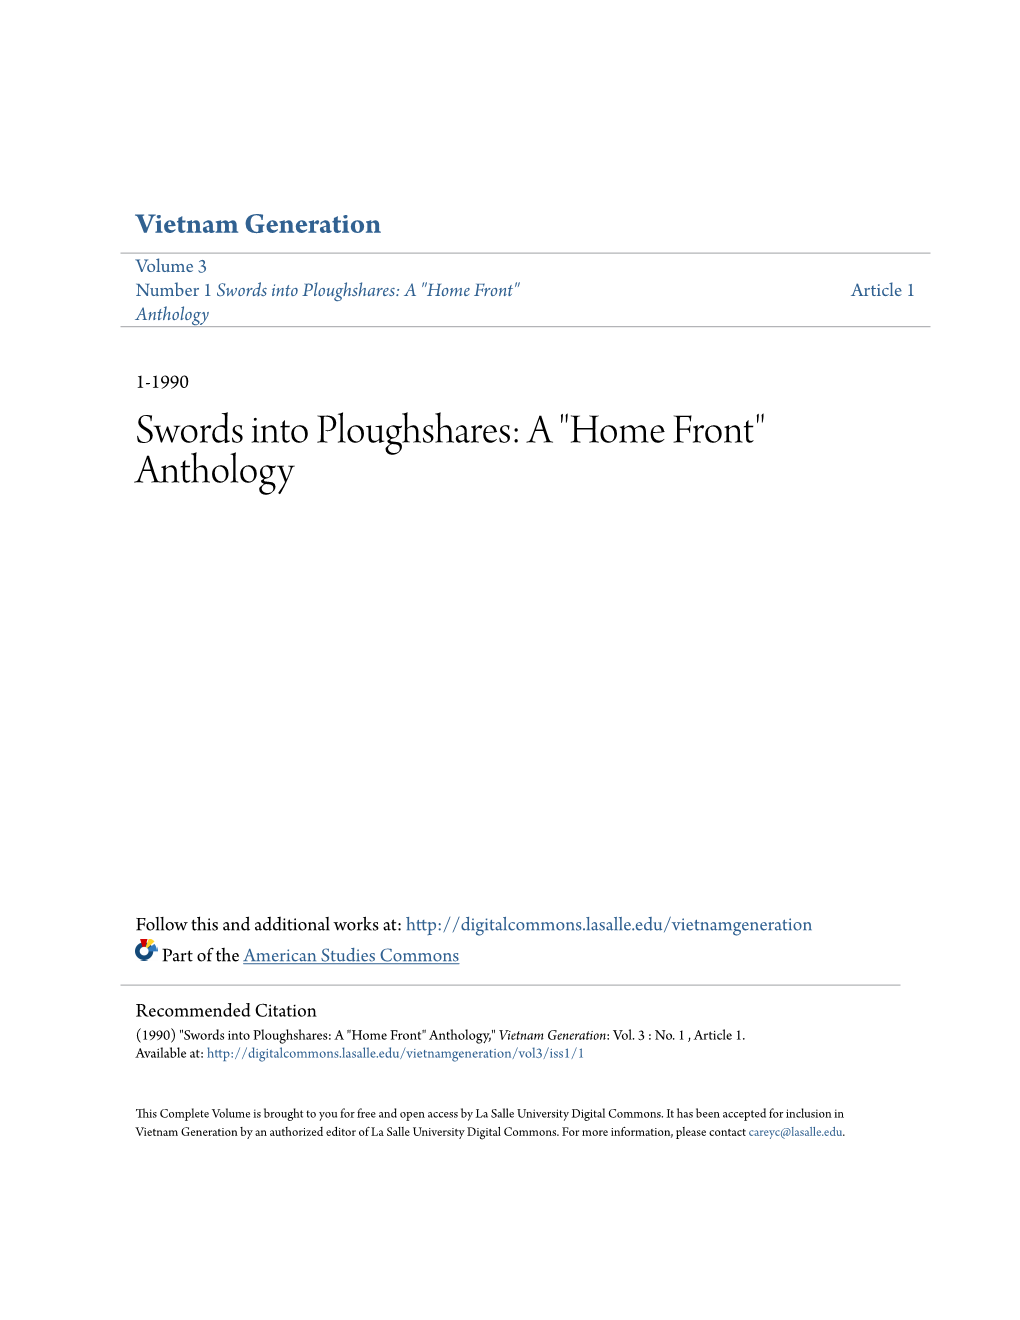 Swords Into Ploughshares: a "Home Front" Article 1 Anthology